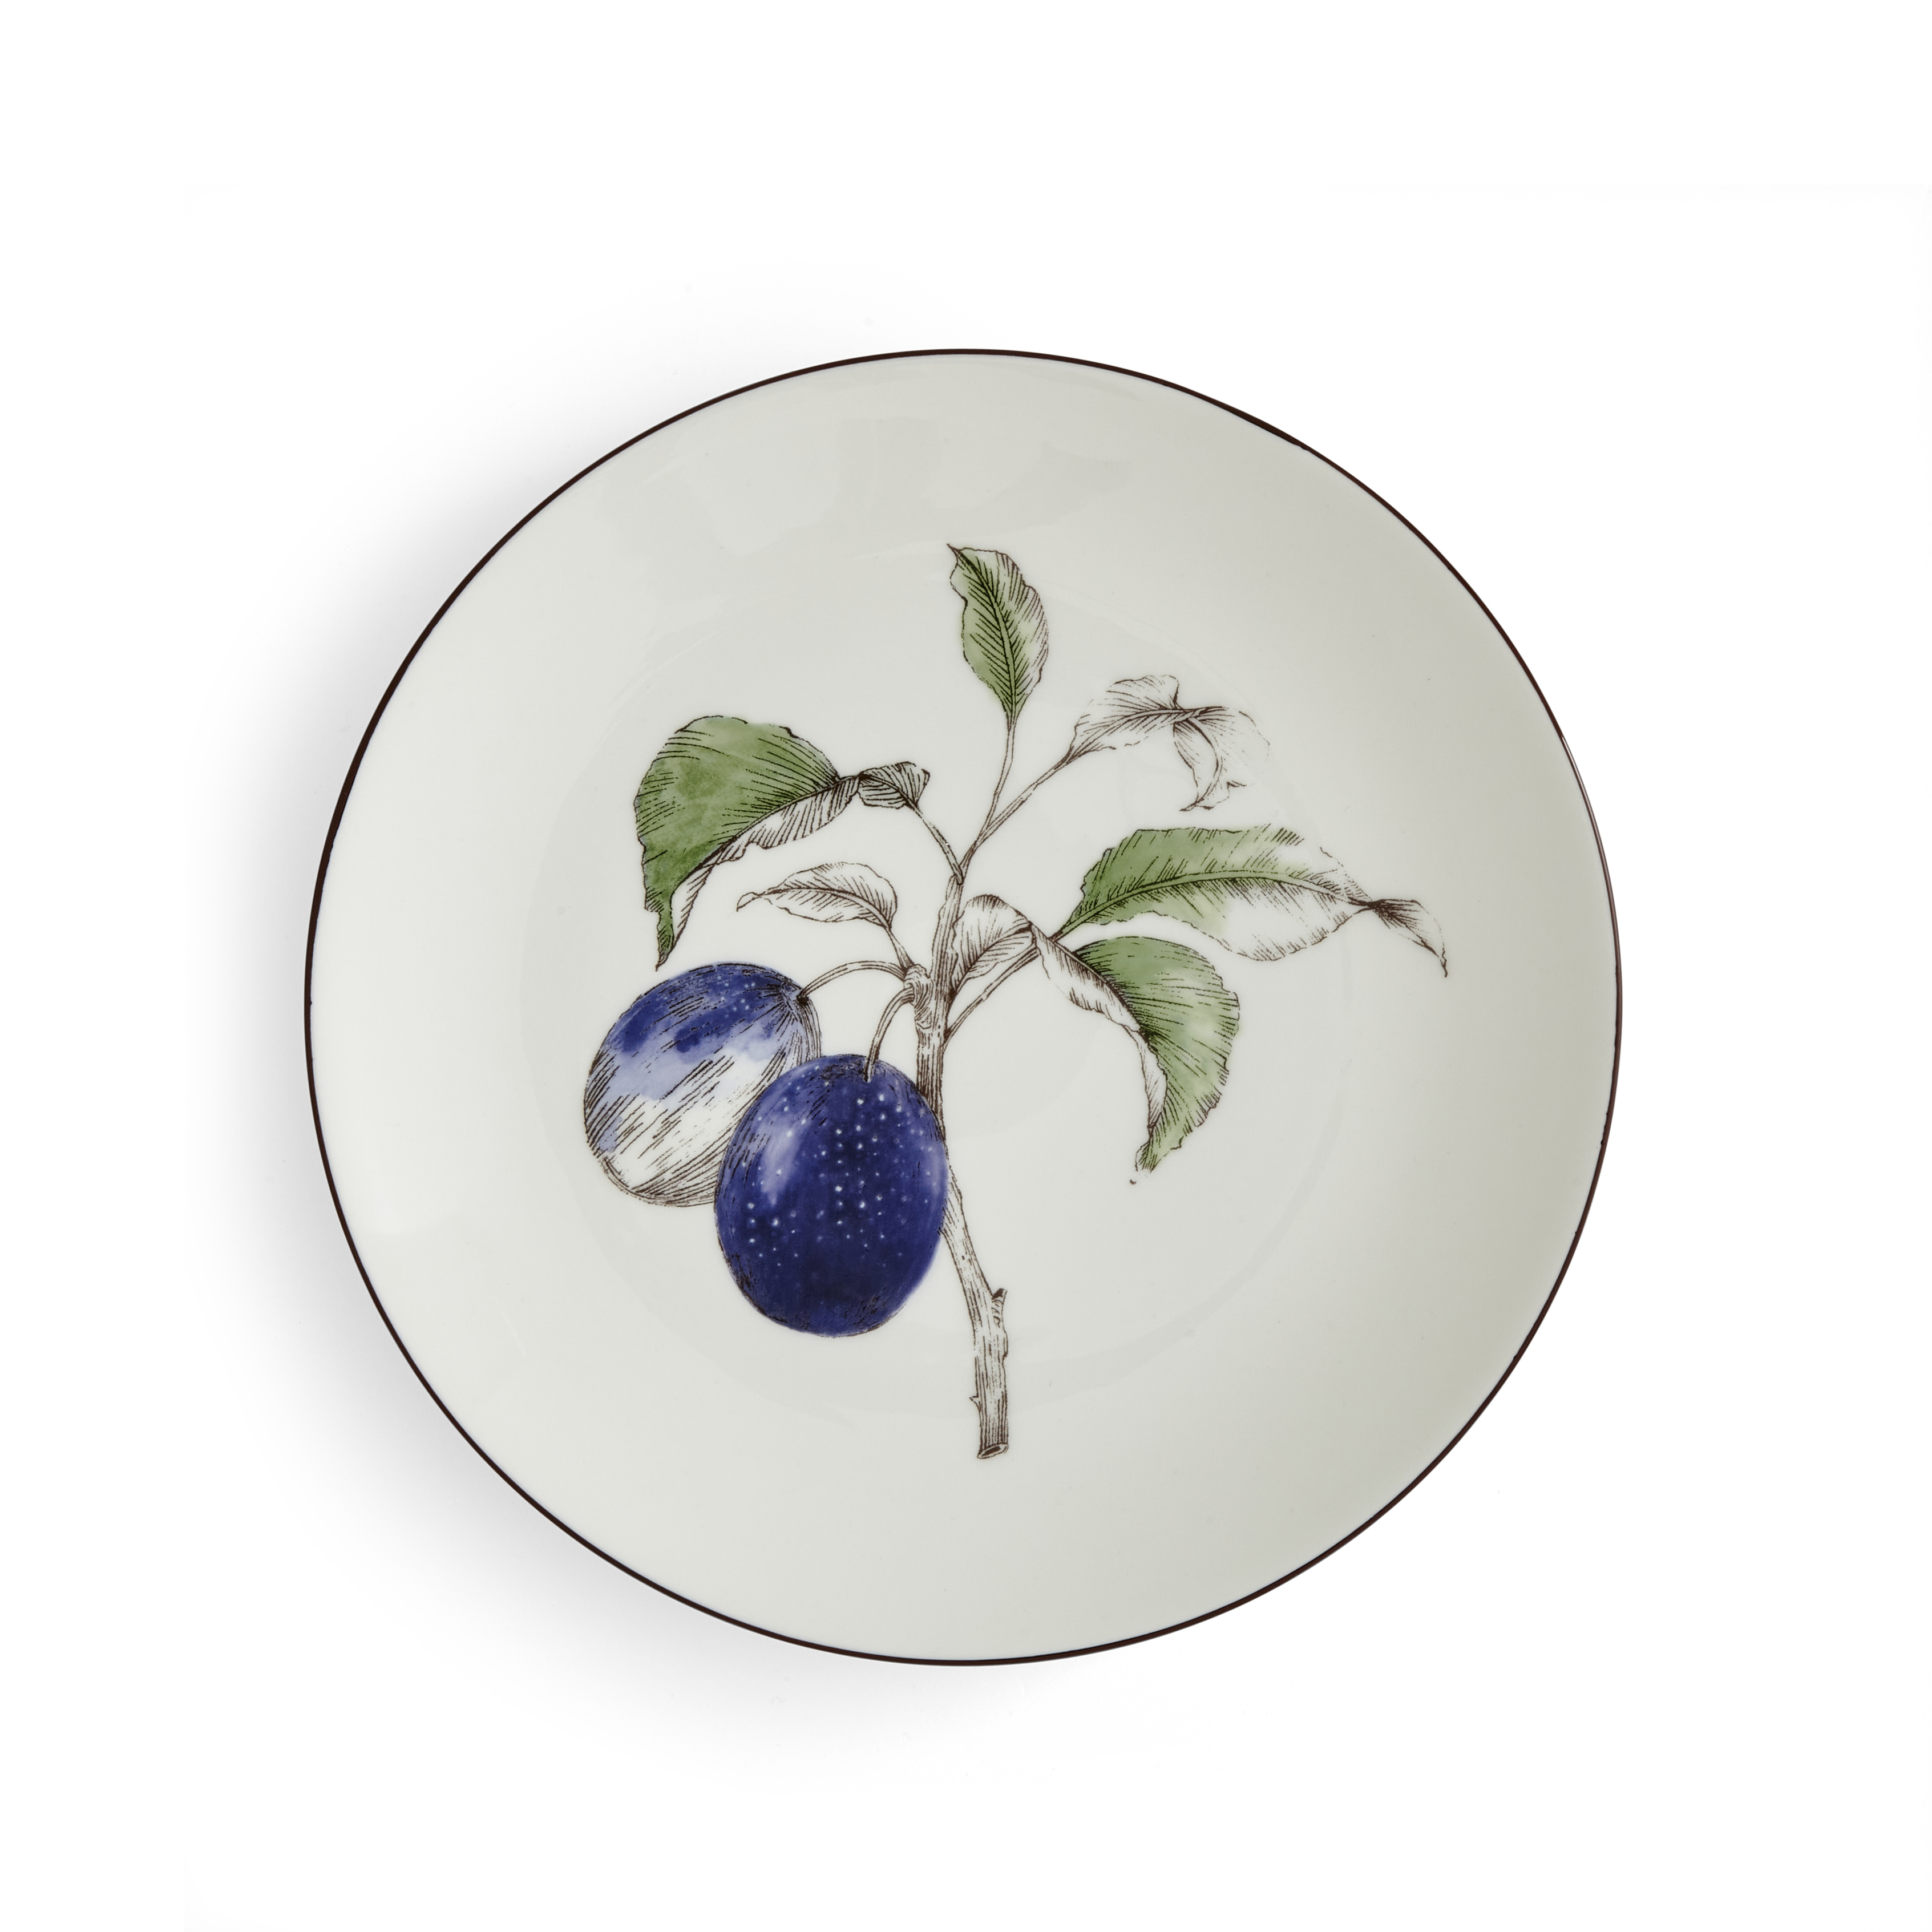 Nature's Bounty 4 Piece Place Setting (Plum) image number null